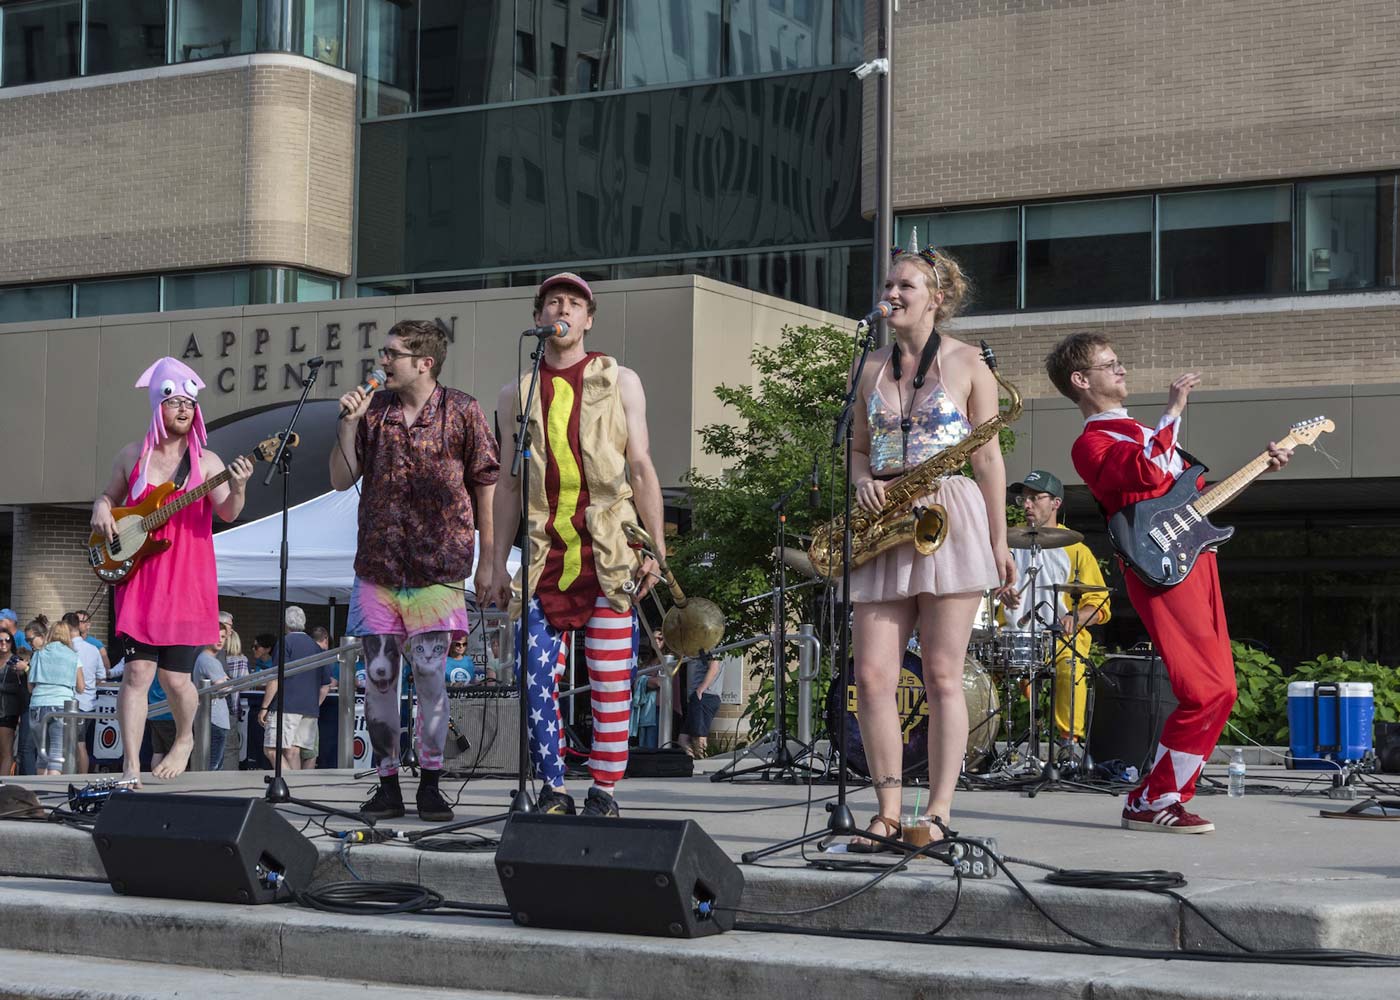 A band called, "Porky's Groove Machine" performs in costumes